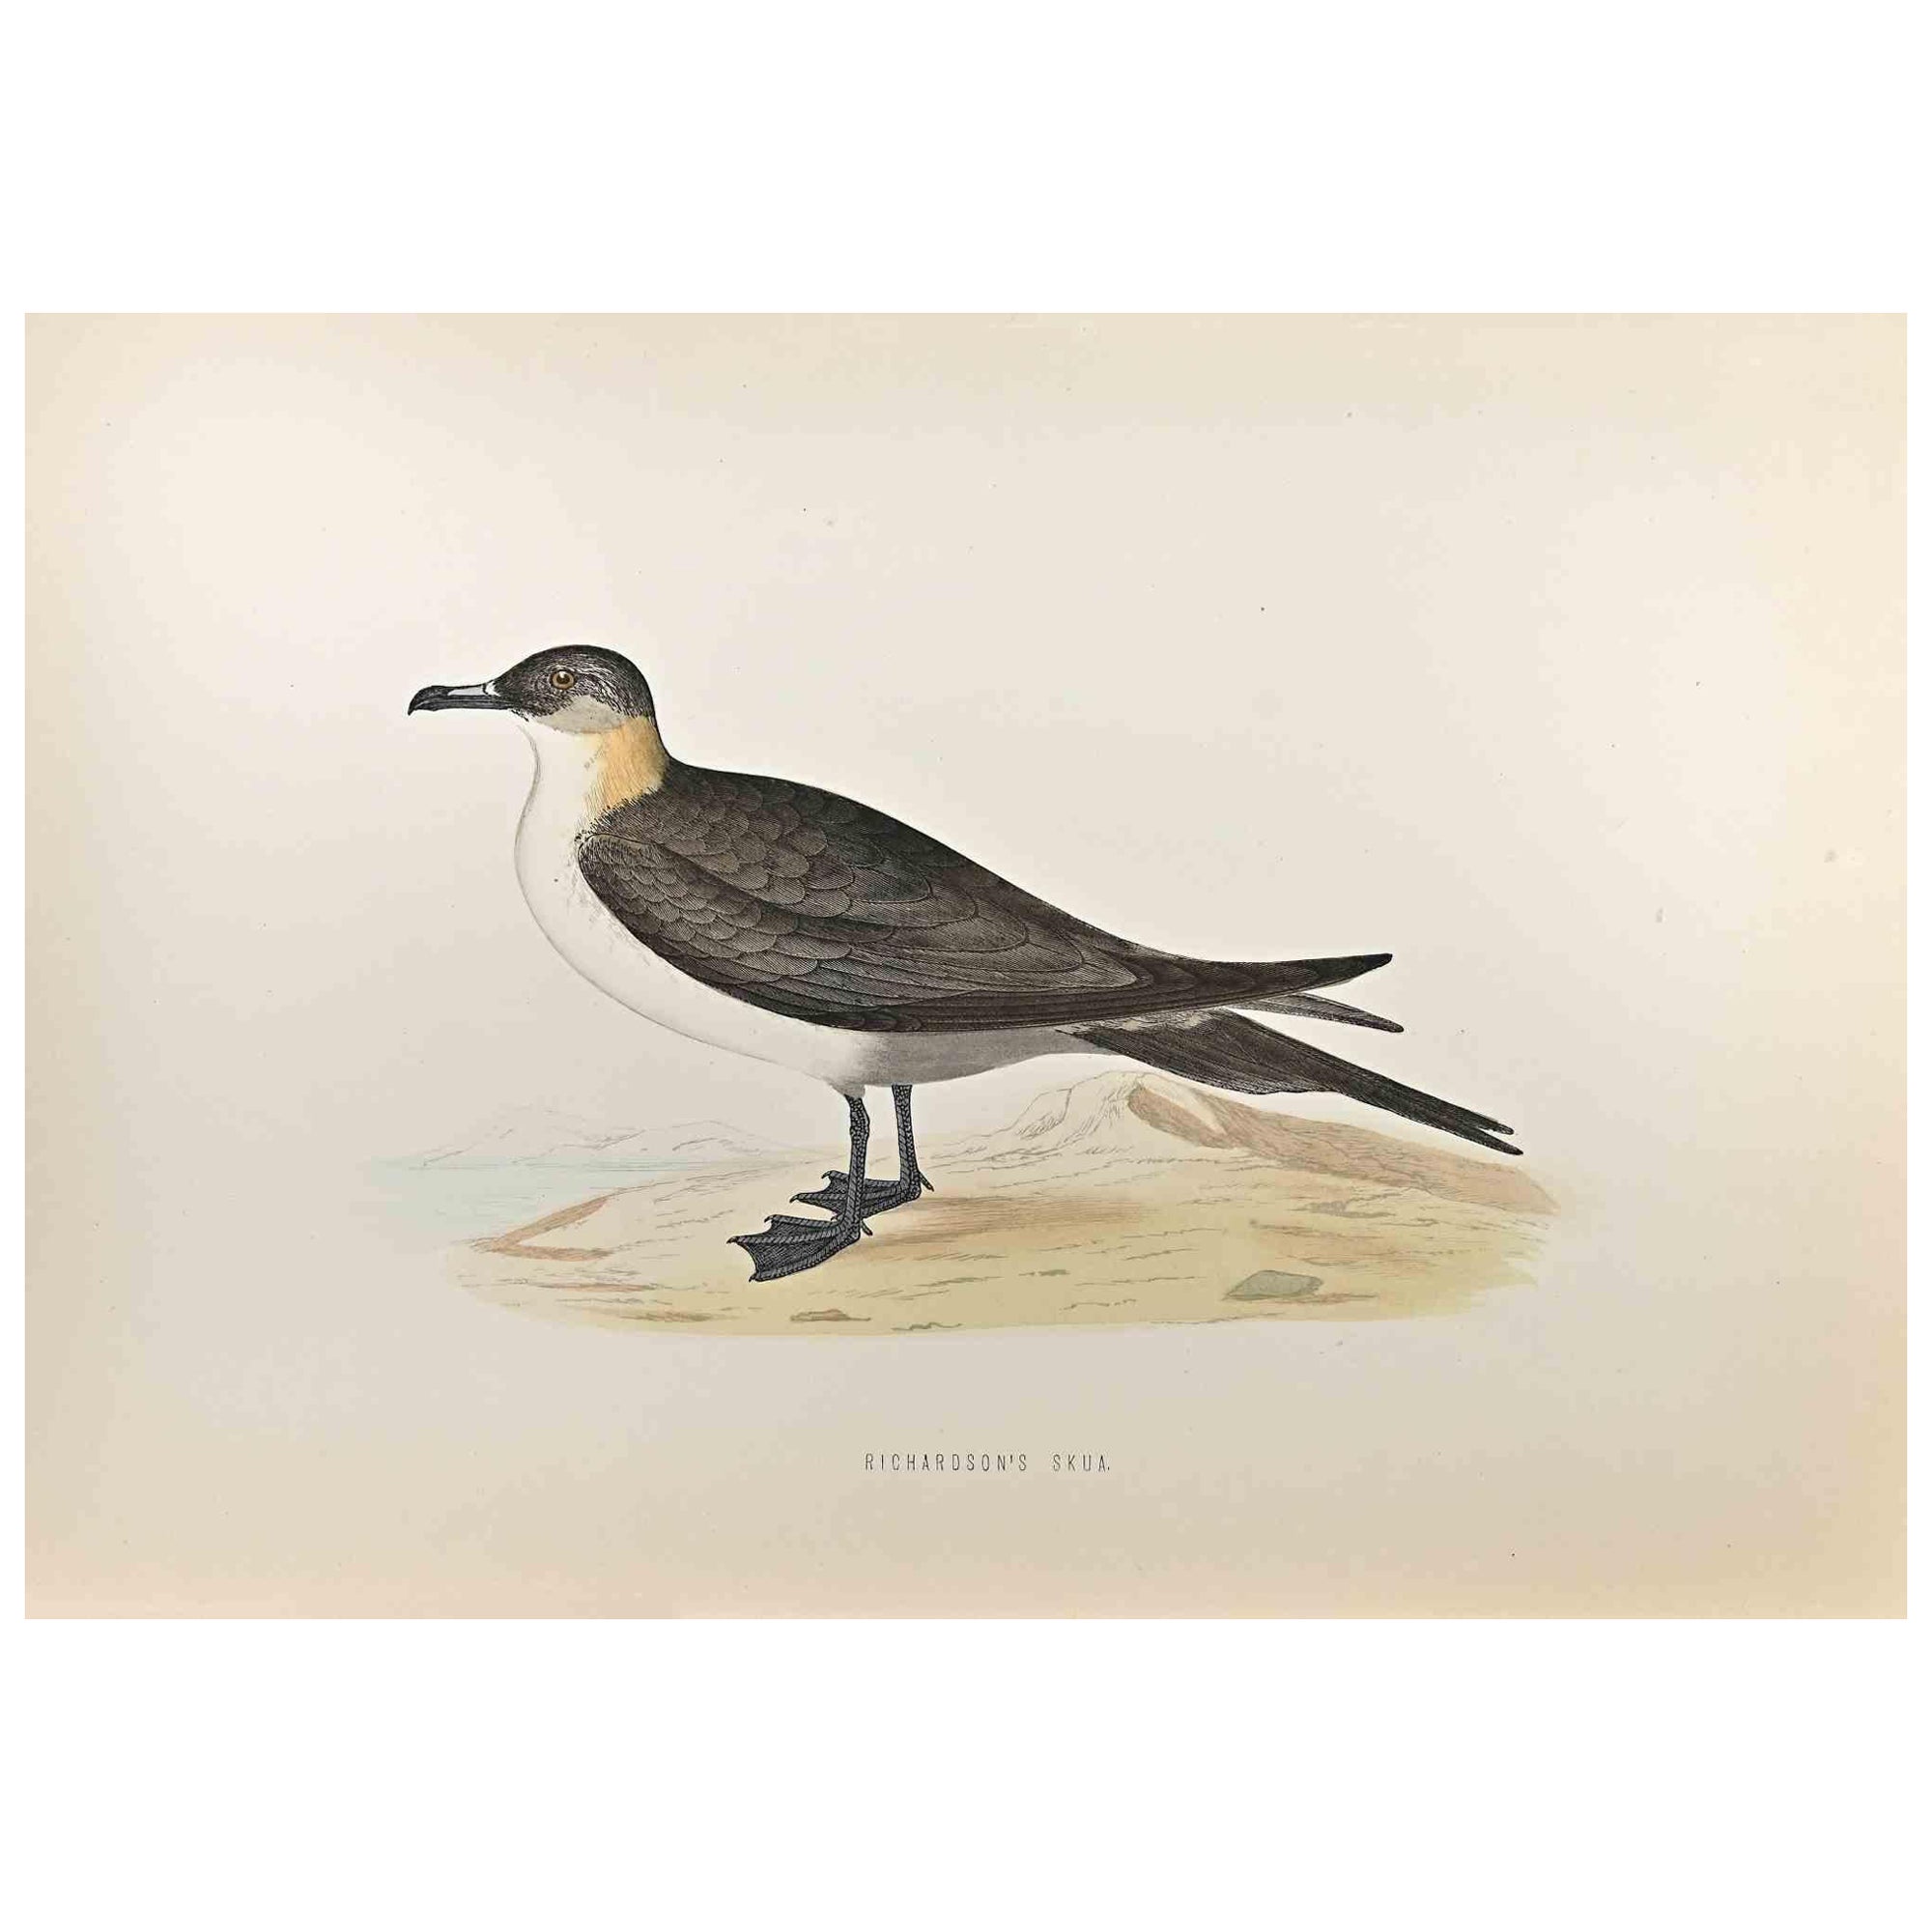 Richardson's Skua is a modern artwork realized in 1870 by the British artist Alexander Francis Lydon (1836-1917) . 

Woodcut print, hand colored, published by London, Bell & Sons, 1870.  Name of the bird printed in plate. This work is part of a